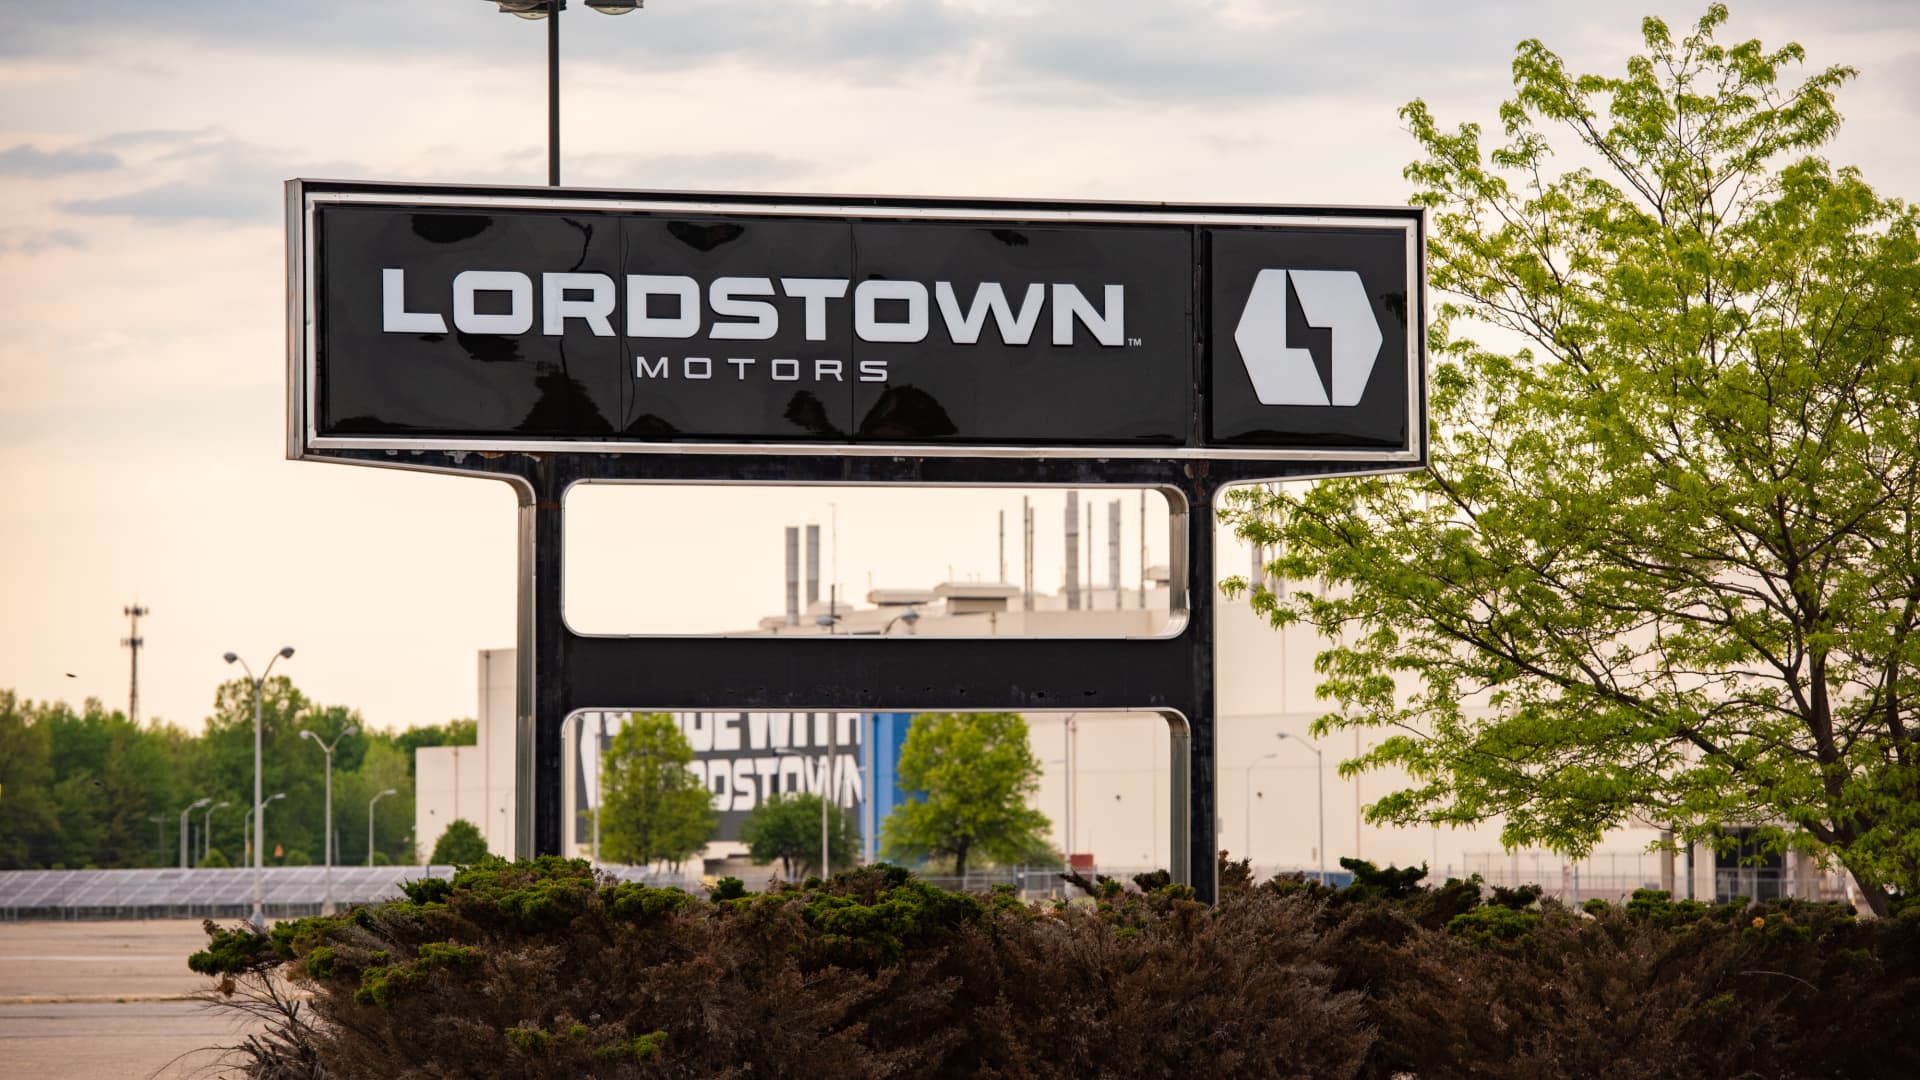 Lordstown aims to boost EV production with Foxconn investment, seeks new automaker partner